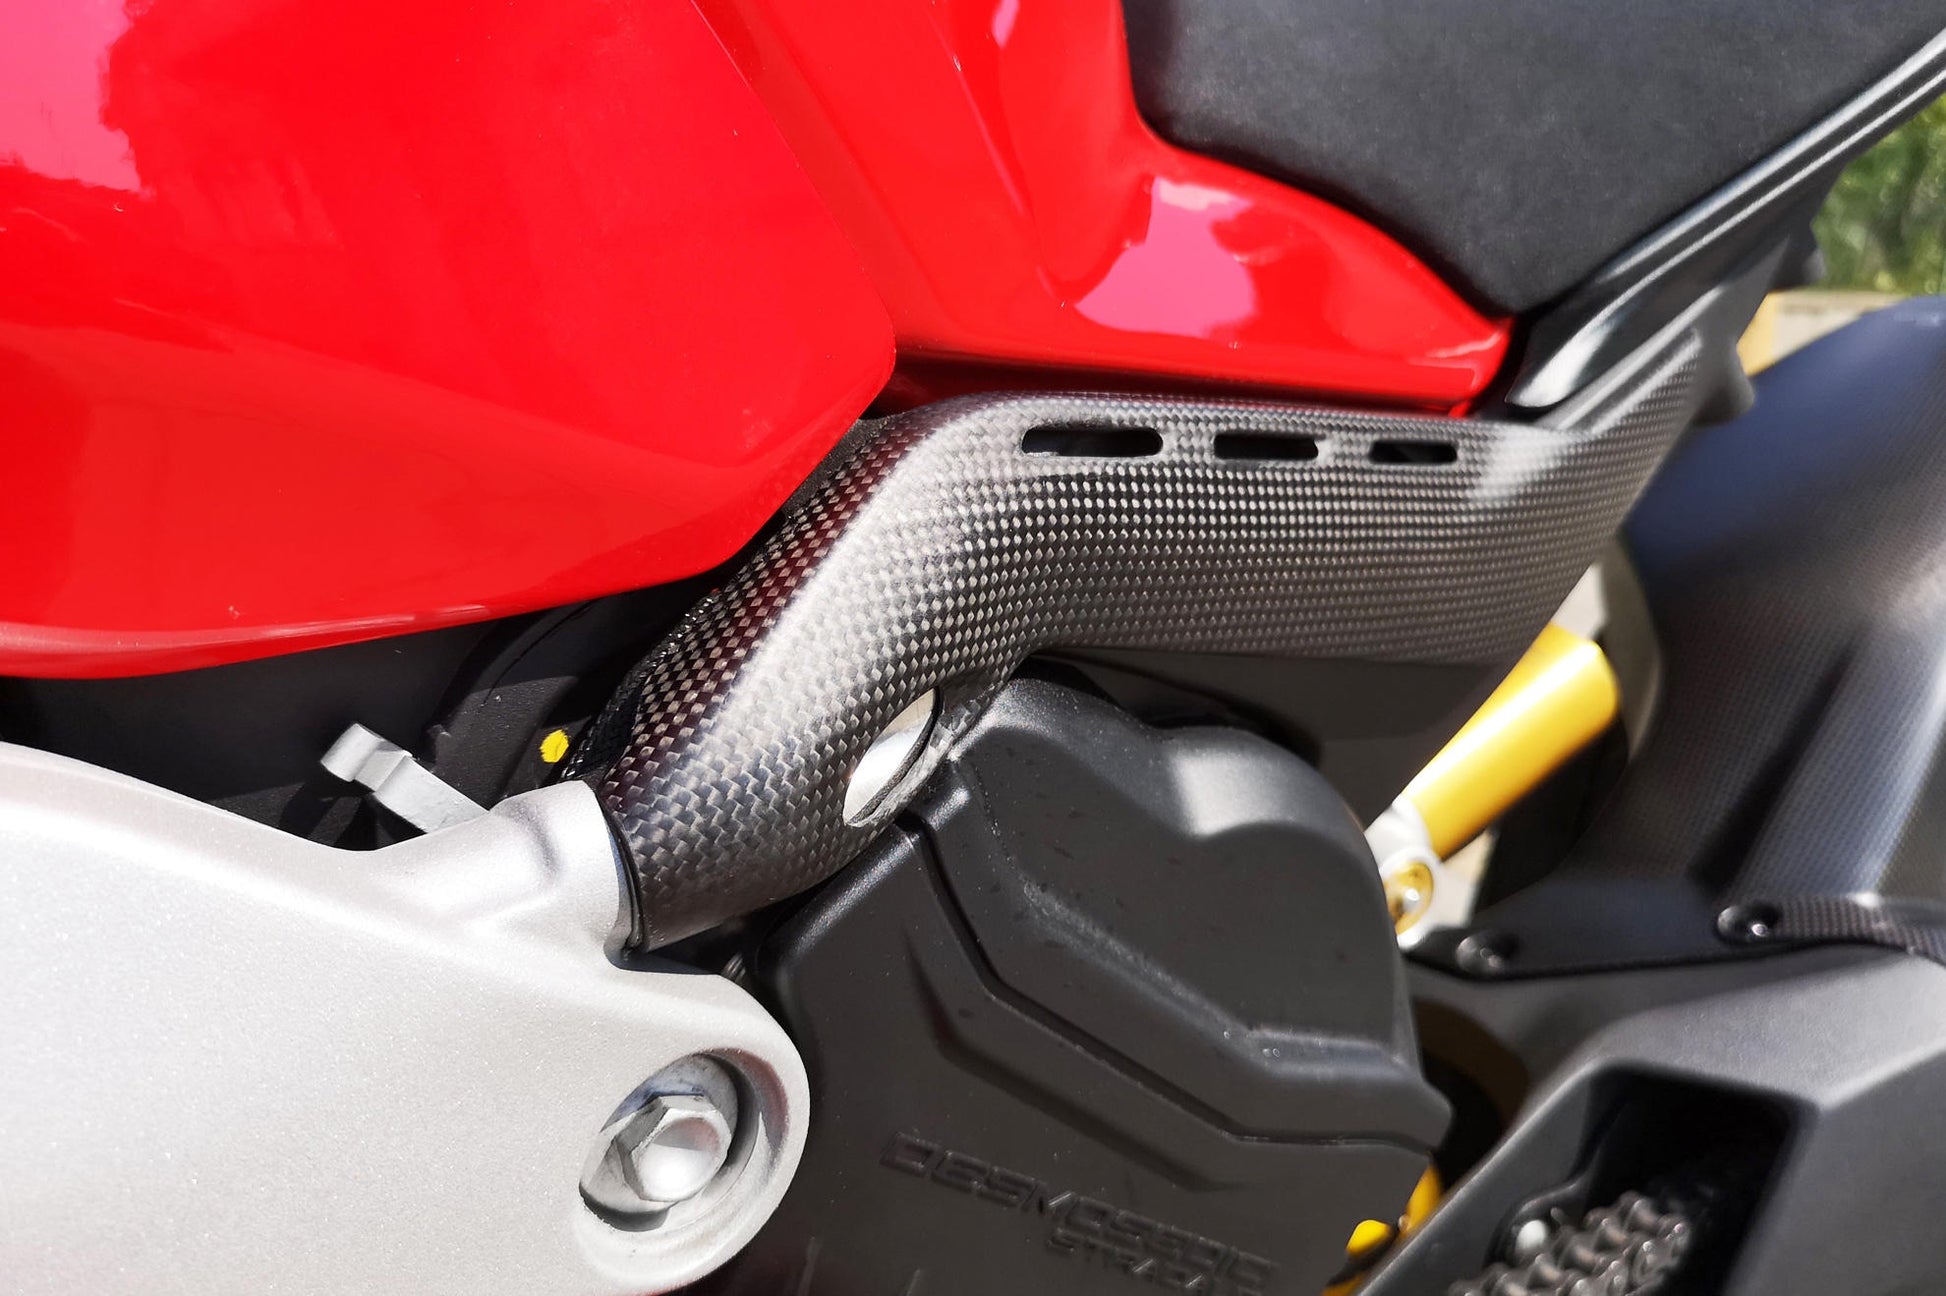 Panigale V4 - Subframe Covers - Averys Motorcycles